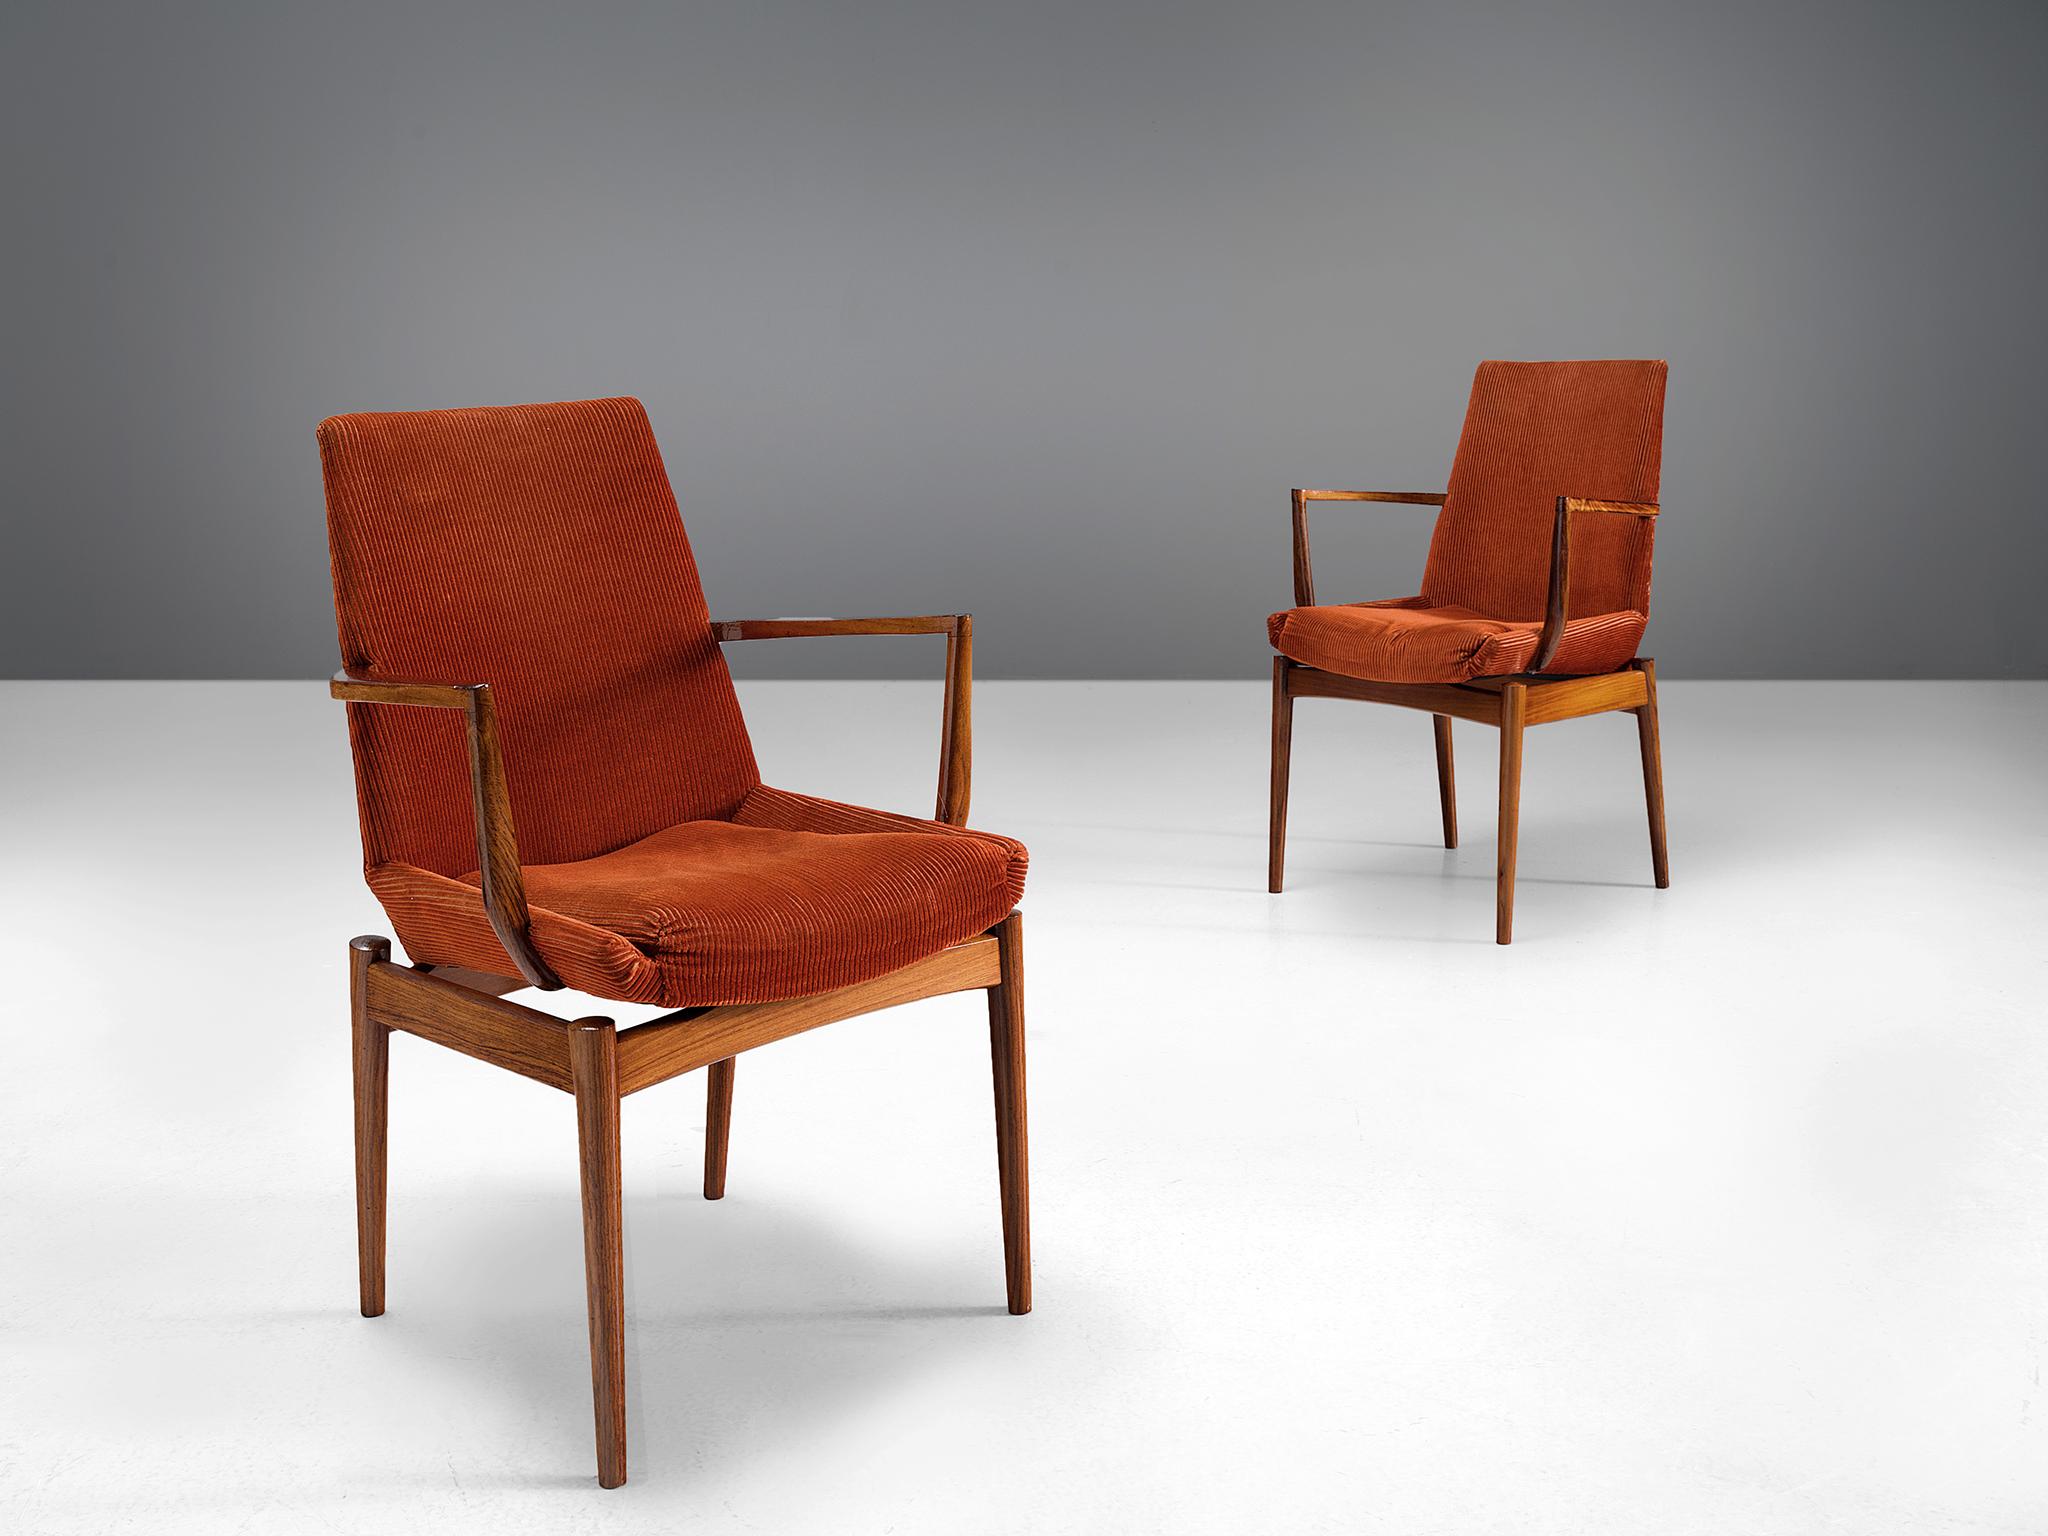 Side chairs, rosewood, red orange corduroy, Scandinavia, circa 1955.

Two chairs is sensuous, sculptural and elegant. The chairs feature high backs, and dramatically high and sculpted armrests. The curved, tapered legs are another main feature of